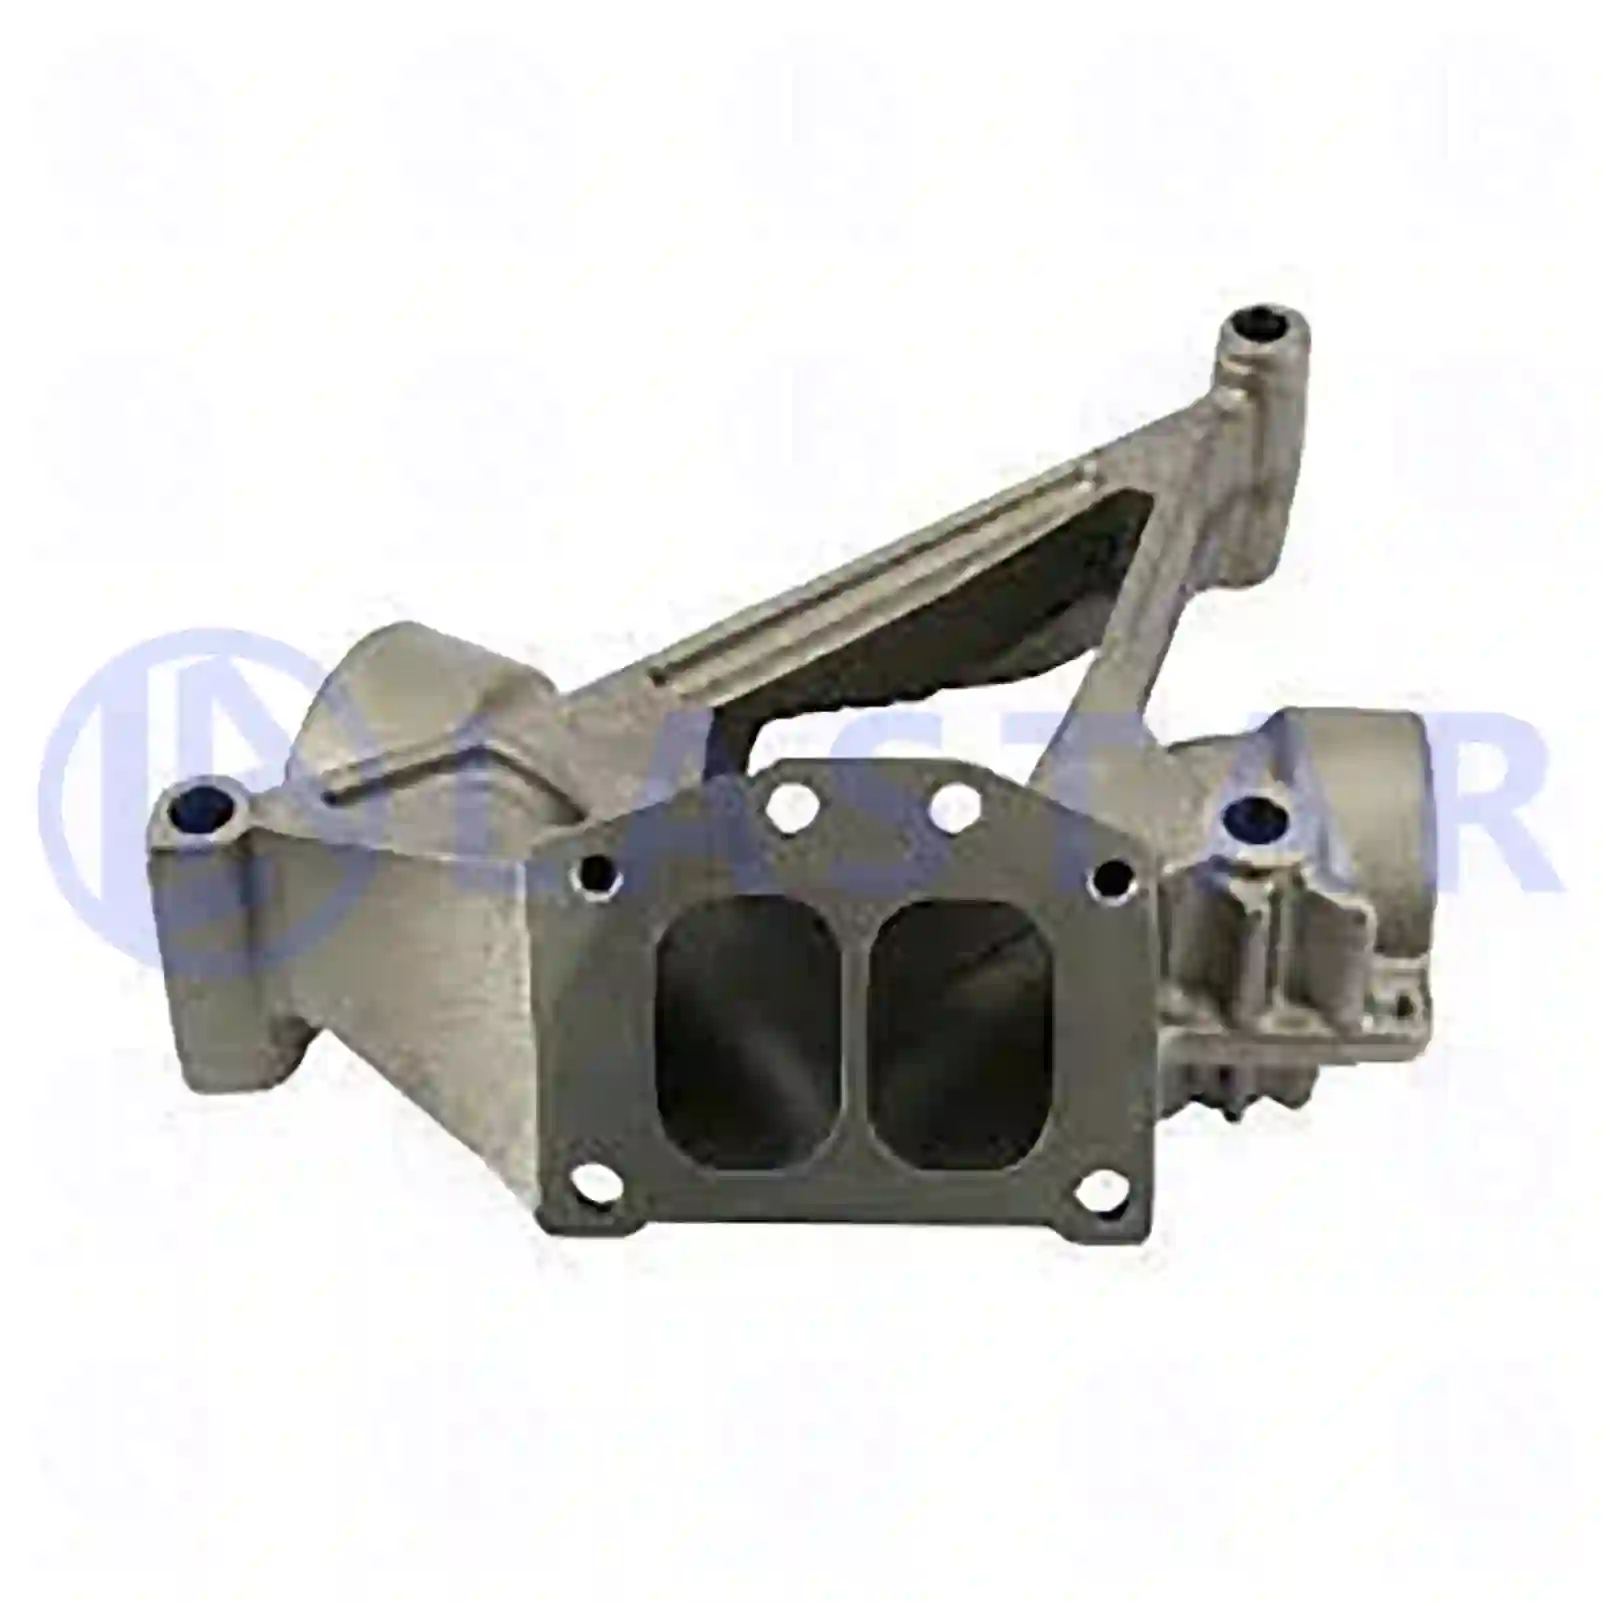 Exhaust manifold, 77703469, 1436788, 1461566, 1503932, 1850826, 2138390 ||  77703469 Lastar Spare Part | Truck Spare Parts, Auotomotive Spare Parts Exhaust manifold, 77703469, 1436788, 1461566, 1503932, 1850826, 2138390 ||  77703469 Lastar Spare Part | Truck Spare Parts, Auotomotive Spare Parts